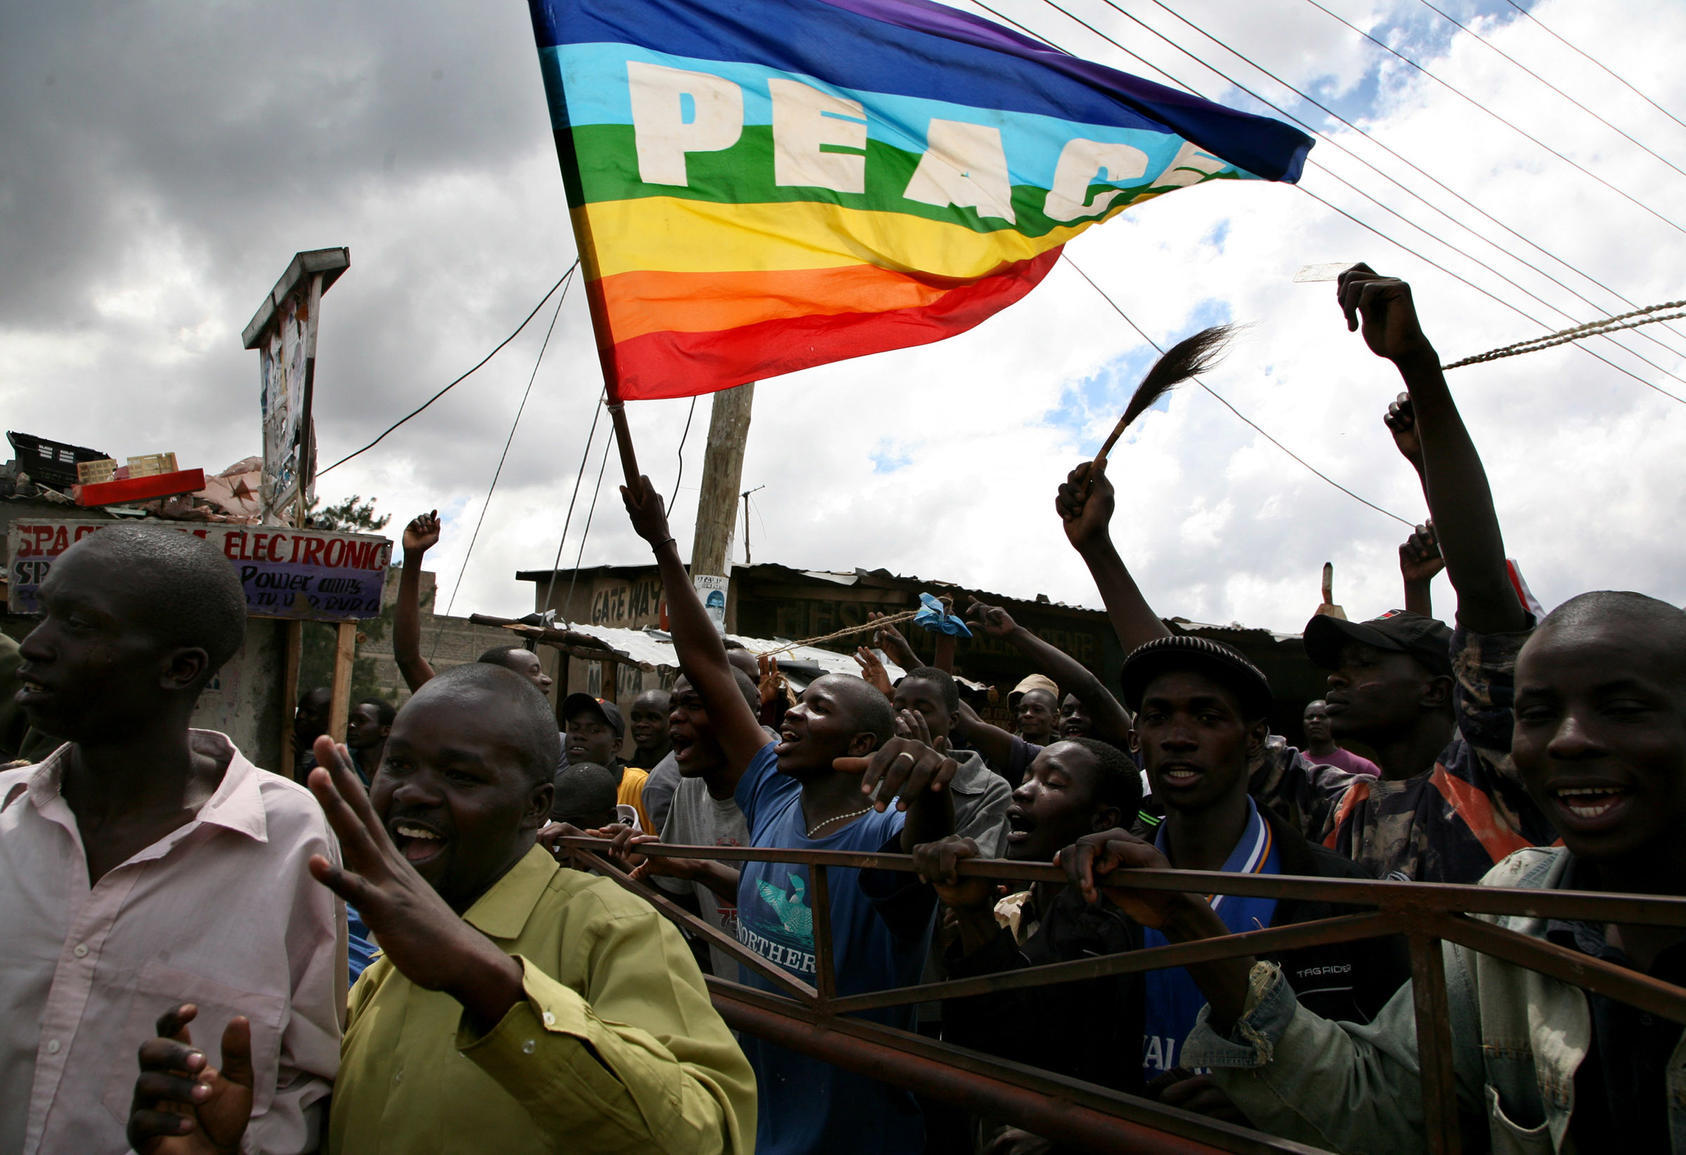 Unrest in Kenya surrounding human rights. Photo Courtesy of The New York Times/Evelyn Hockstein